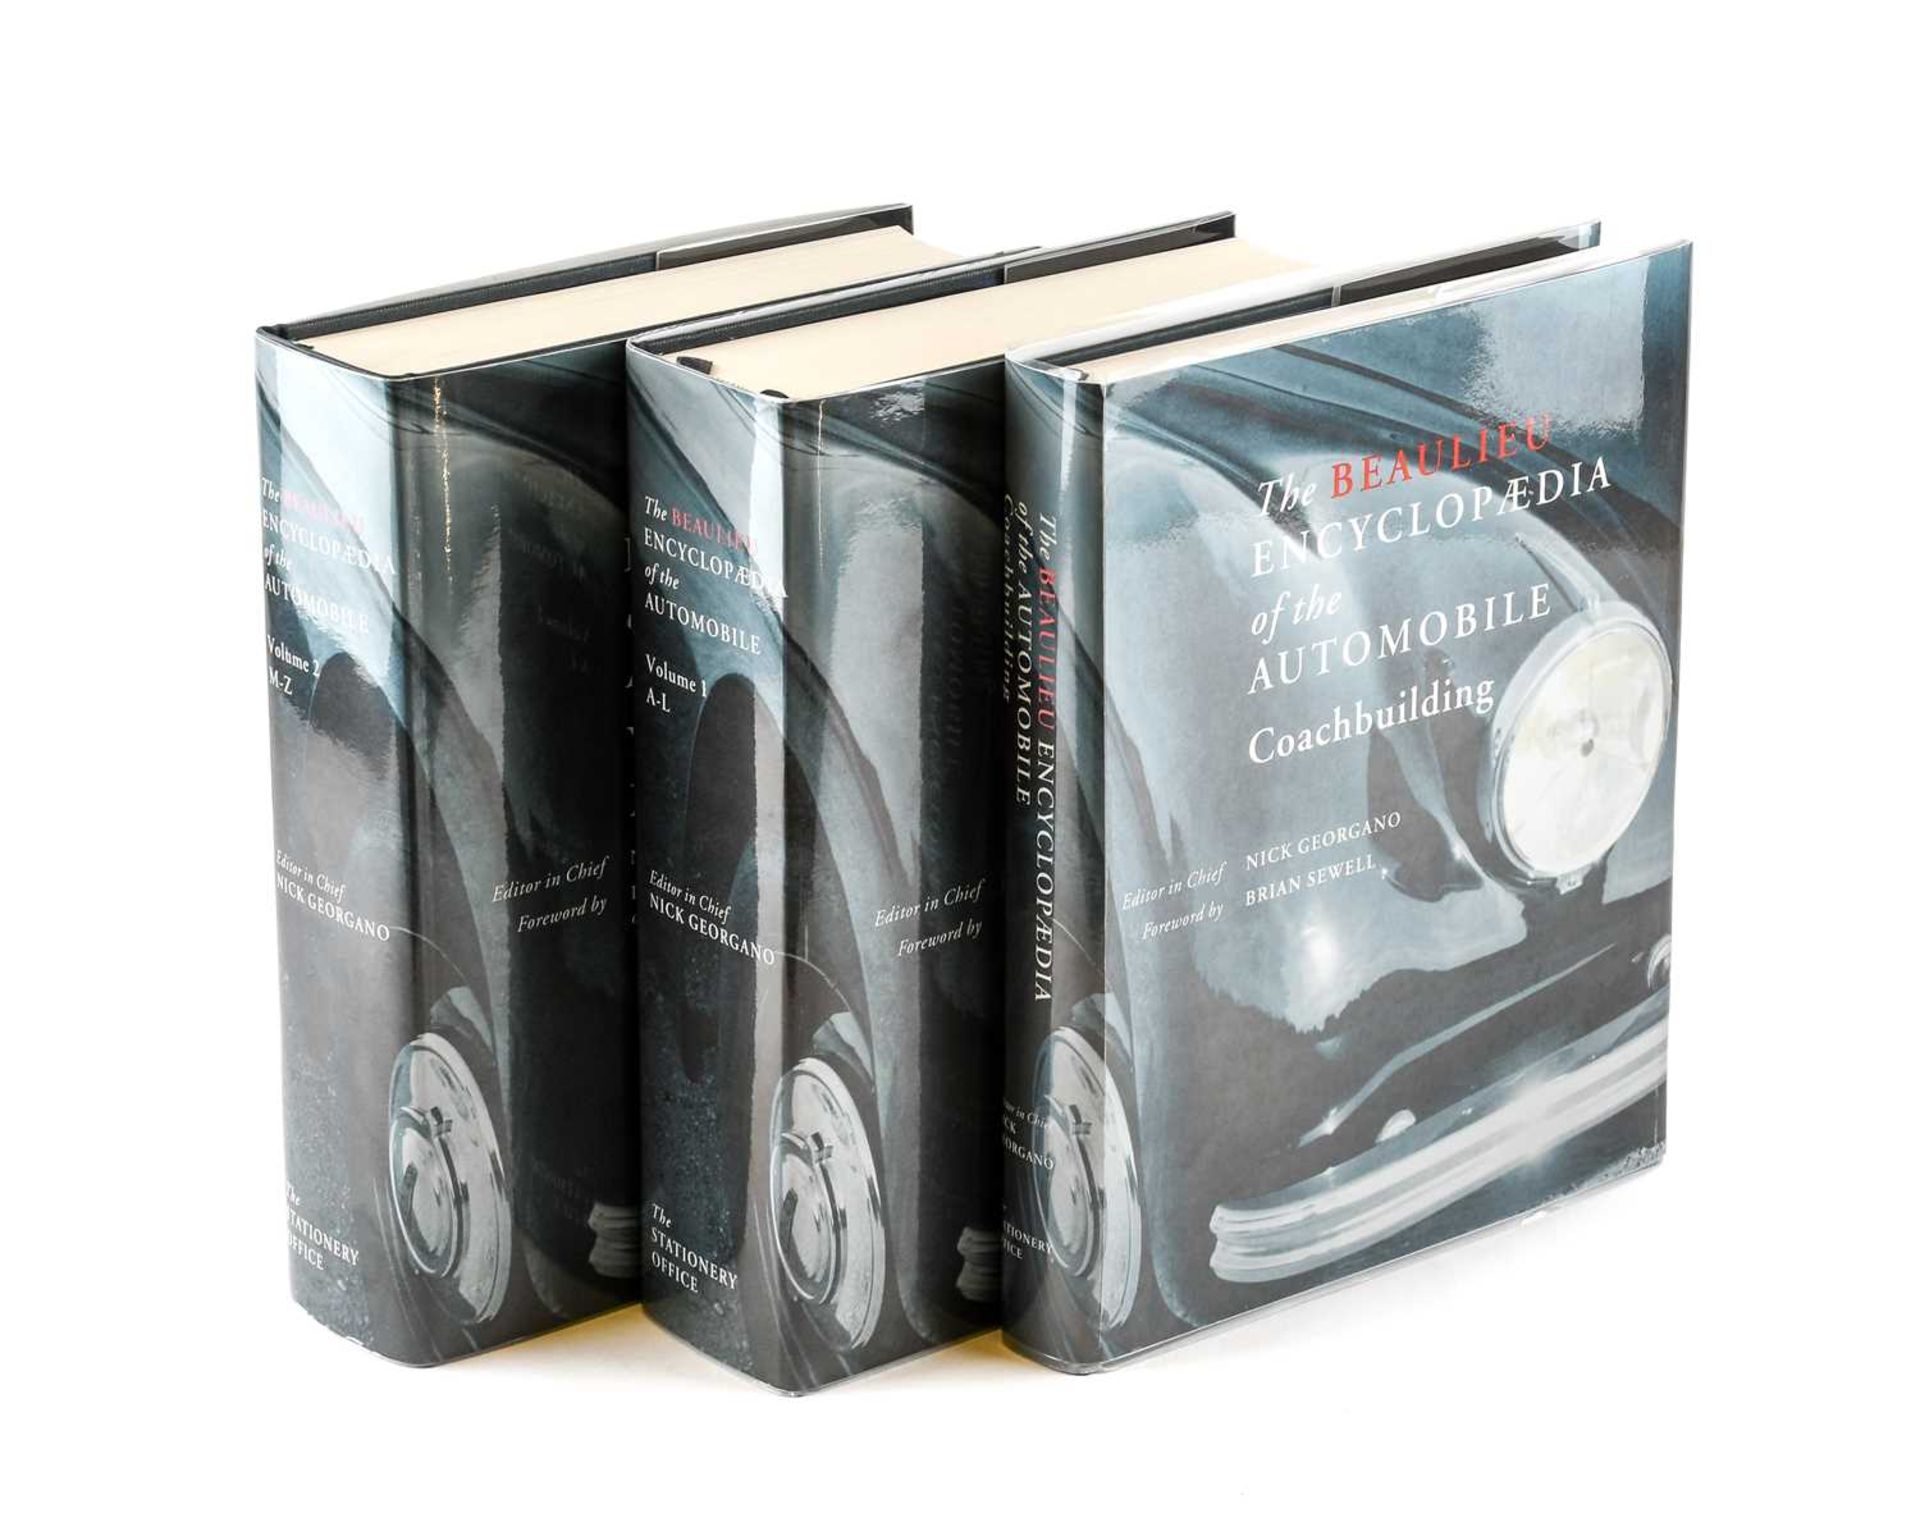 Beaulieu Encyclopedia of the Automobile, published in three volumes, second edition 2001 by Office